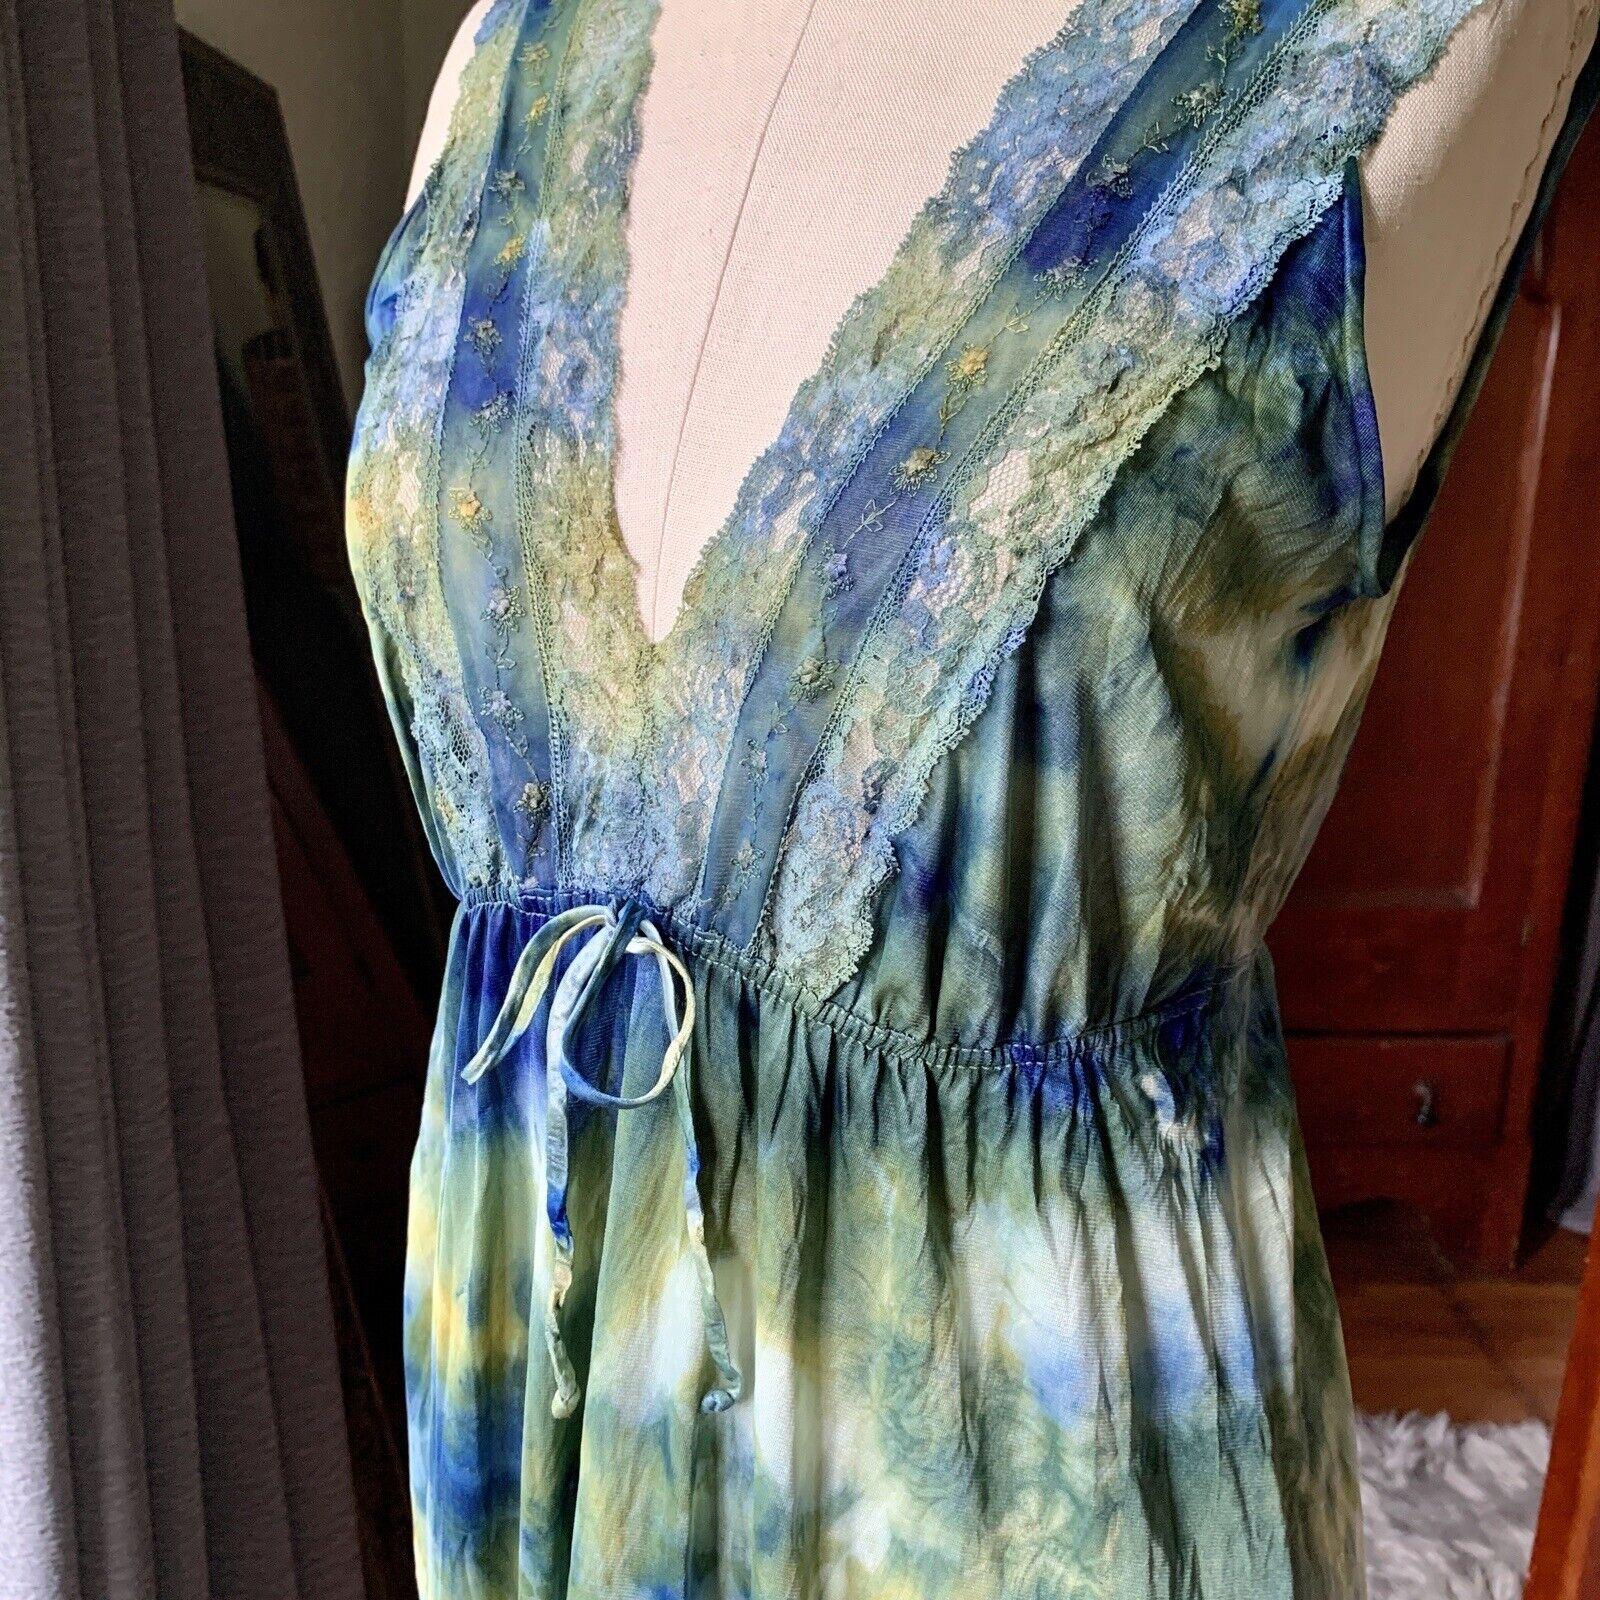 DYED PETALS Vintage Hand Botanically Dyed Tie-Dyed Slip Dress S/M 36 For Sale 3